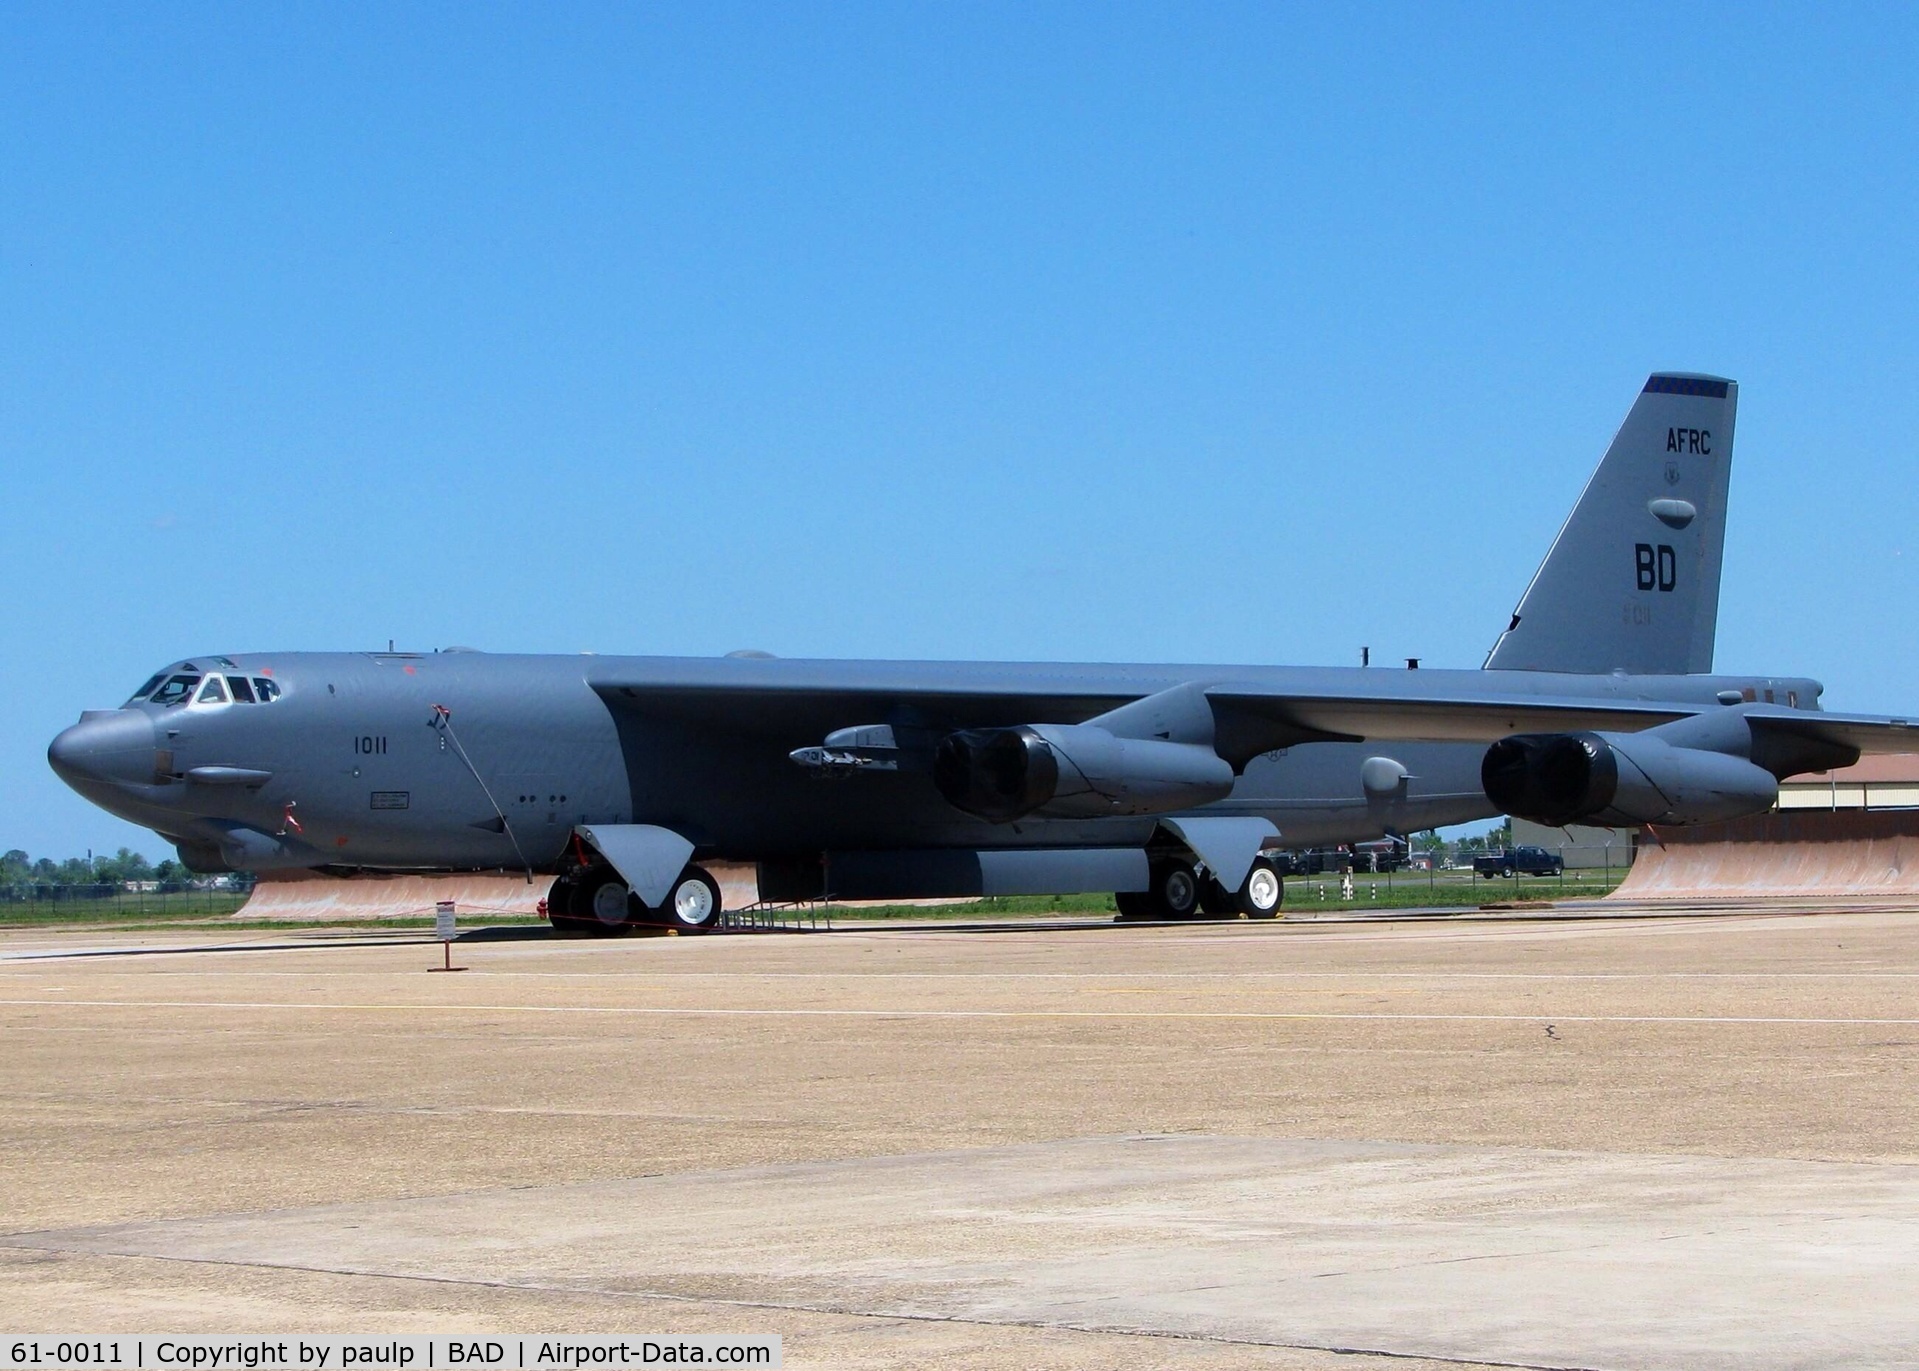 61-0011, 1961 Boeing B-52H Stratofortress C/N 464438, At Barksdale Air Force Base.